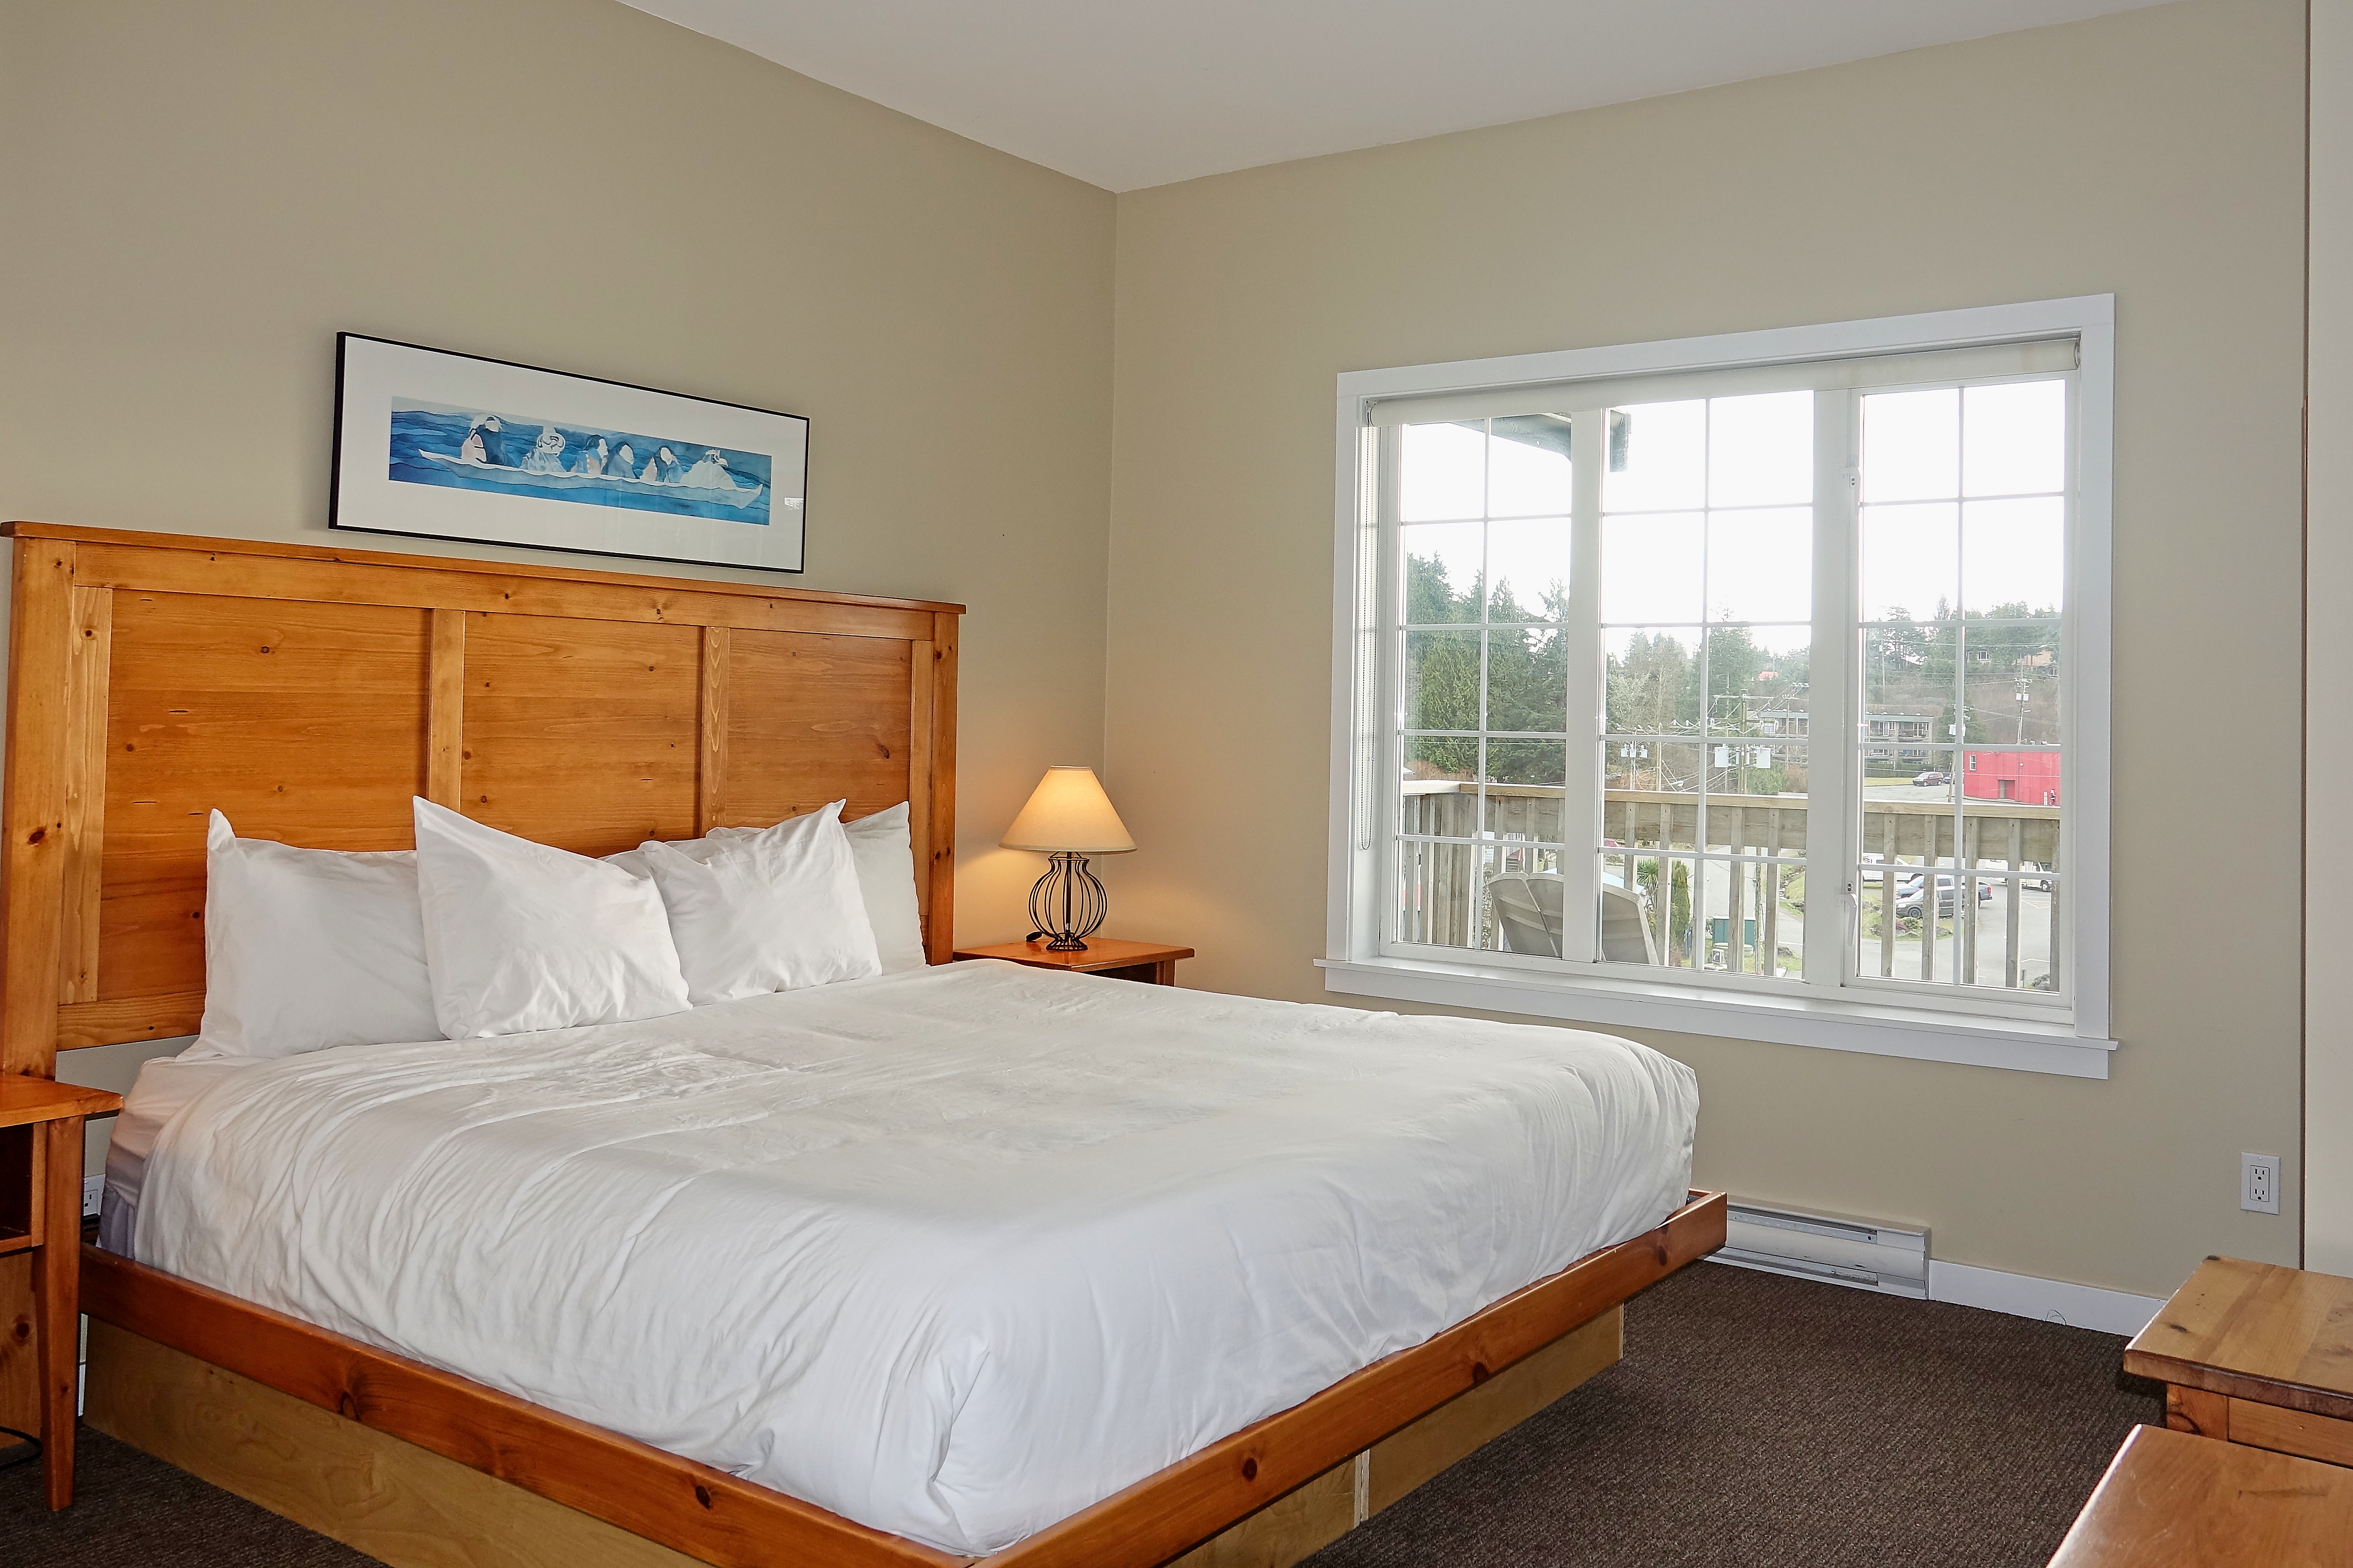 807 - 1971 Harbour Dr, Ucluelet, British Columbia  V0R 3A0 - Photo 2 - RP3549369046